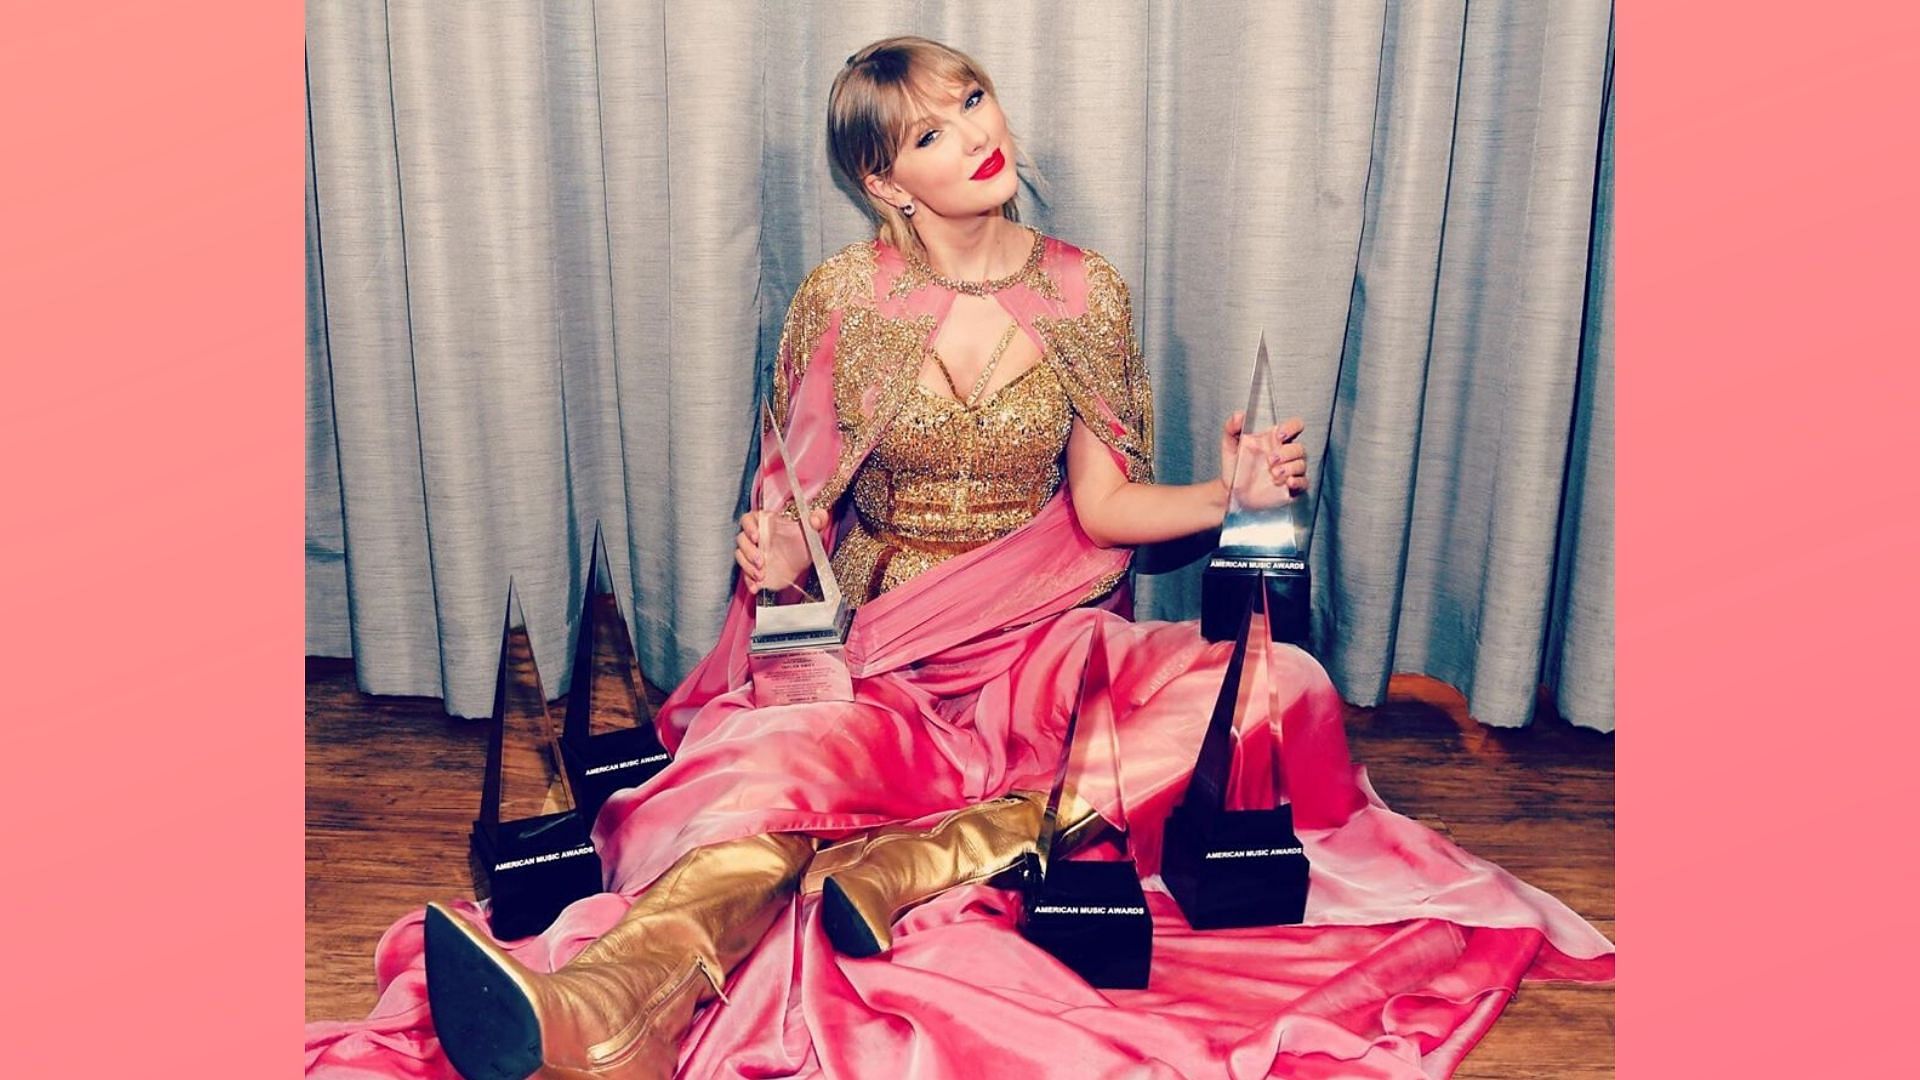 Taylor Swift won in six categories at the 2019 AMAs.